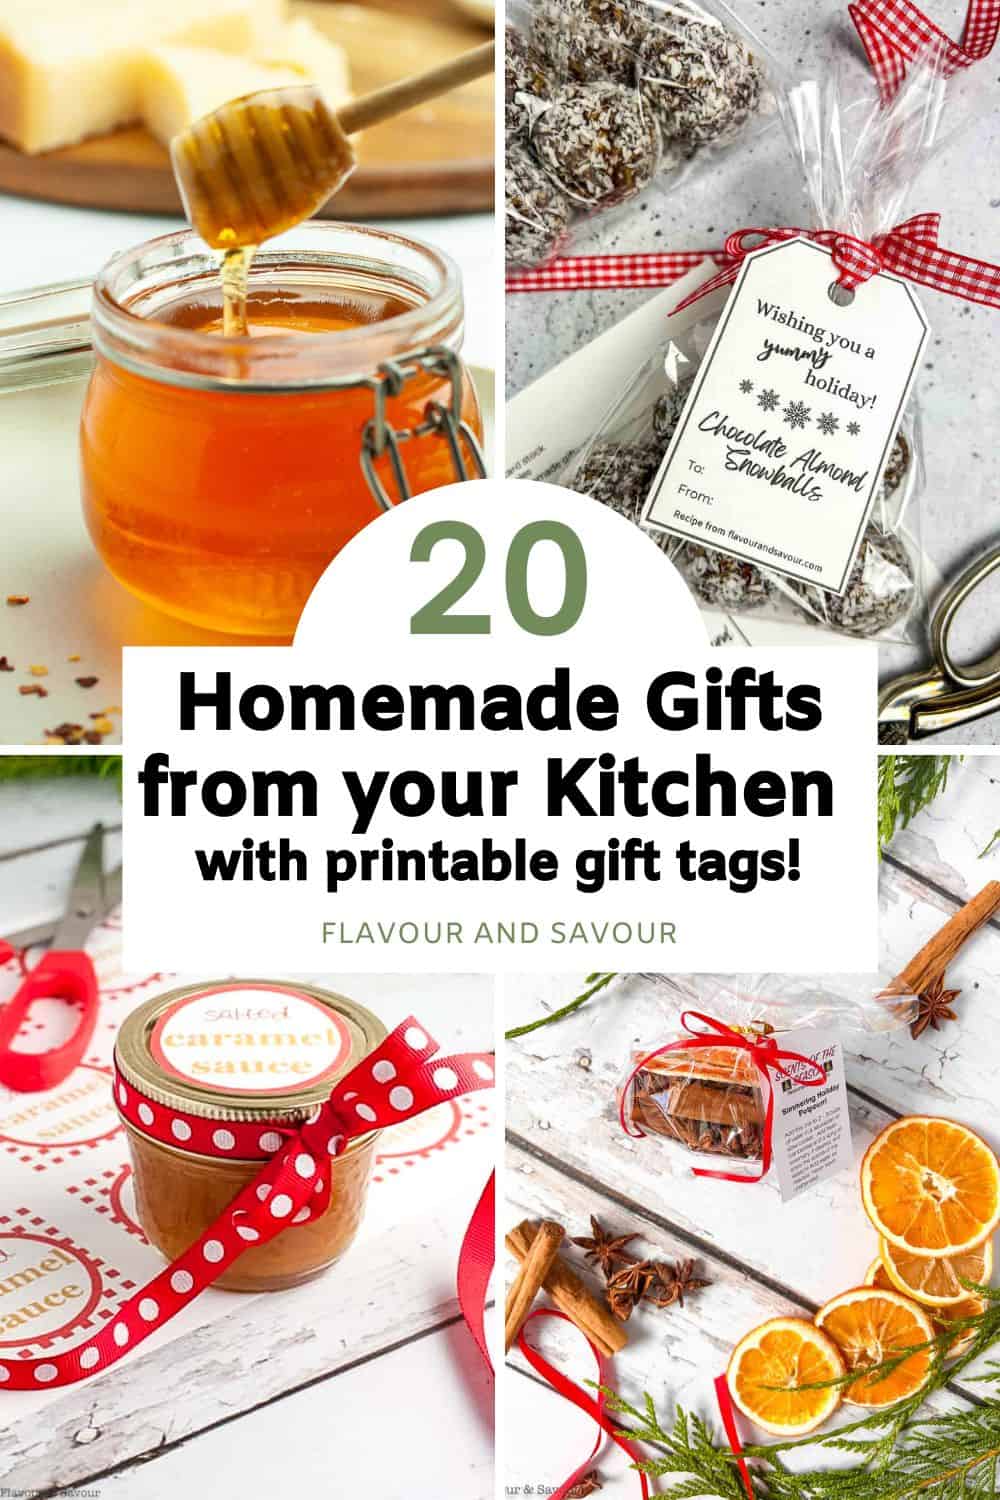 47 Homemade Food Gifts in a Jar for Christmas with Printable Tags